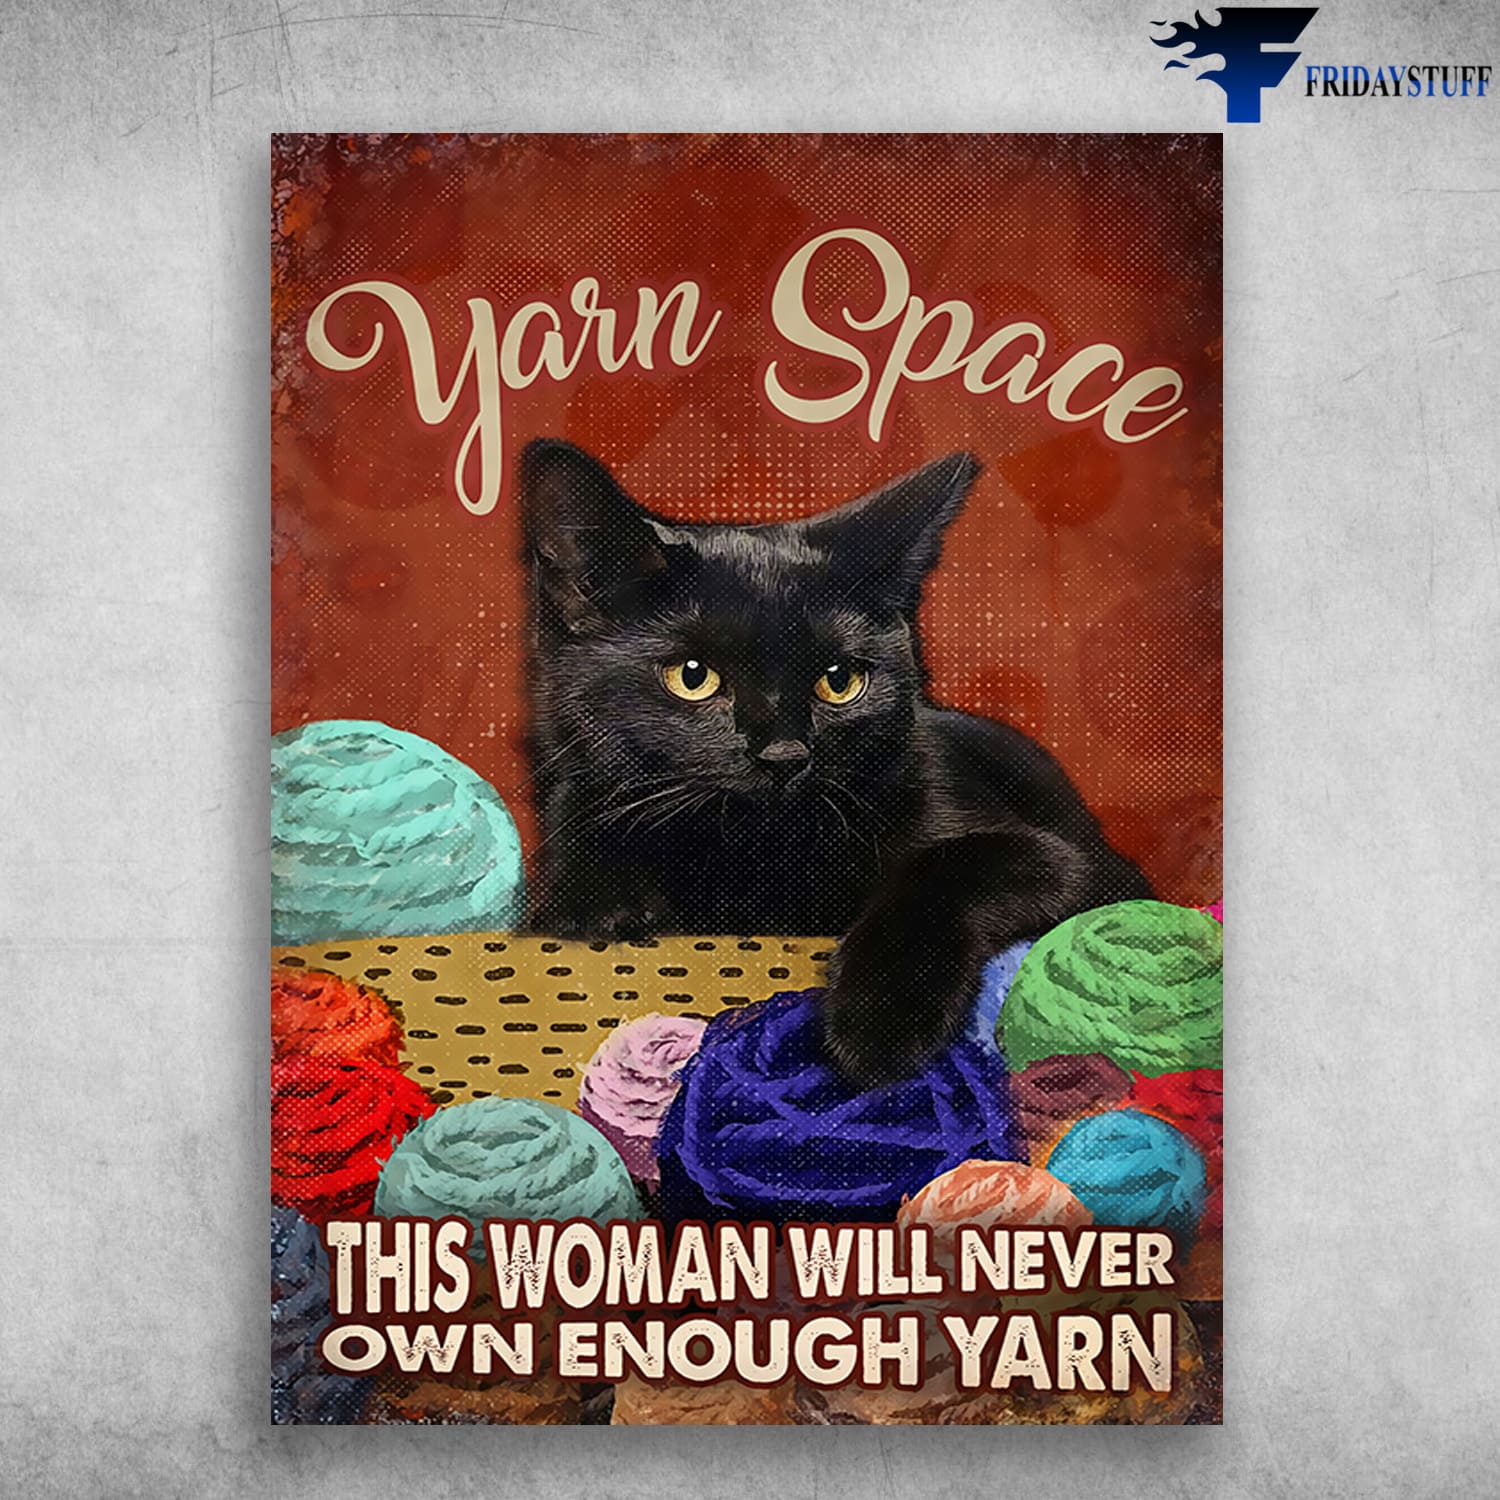 Black Cat, Yarn Space, This Woman Will Never, Own Enough Yarn